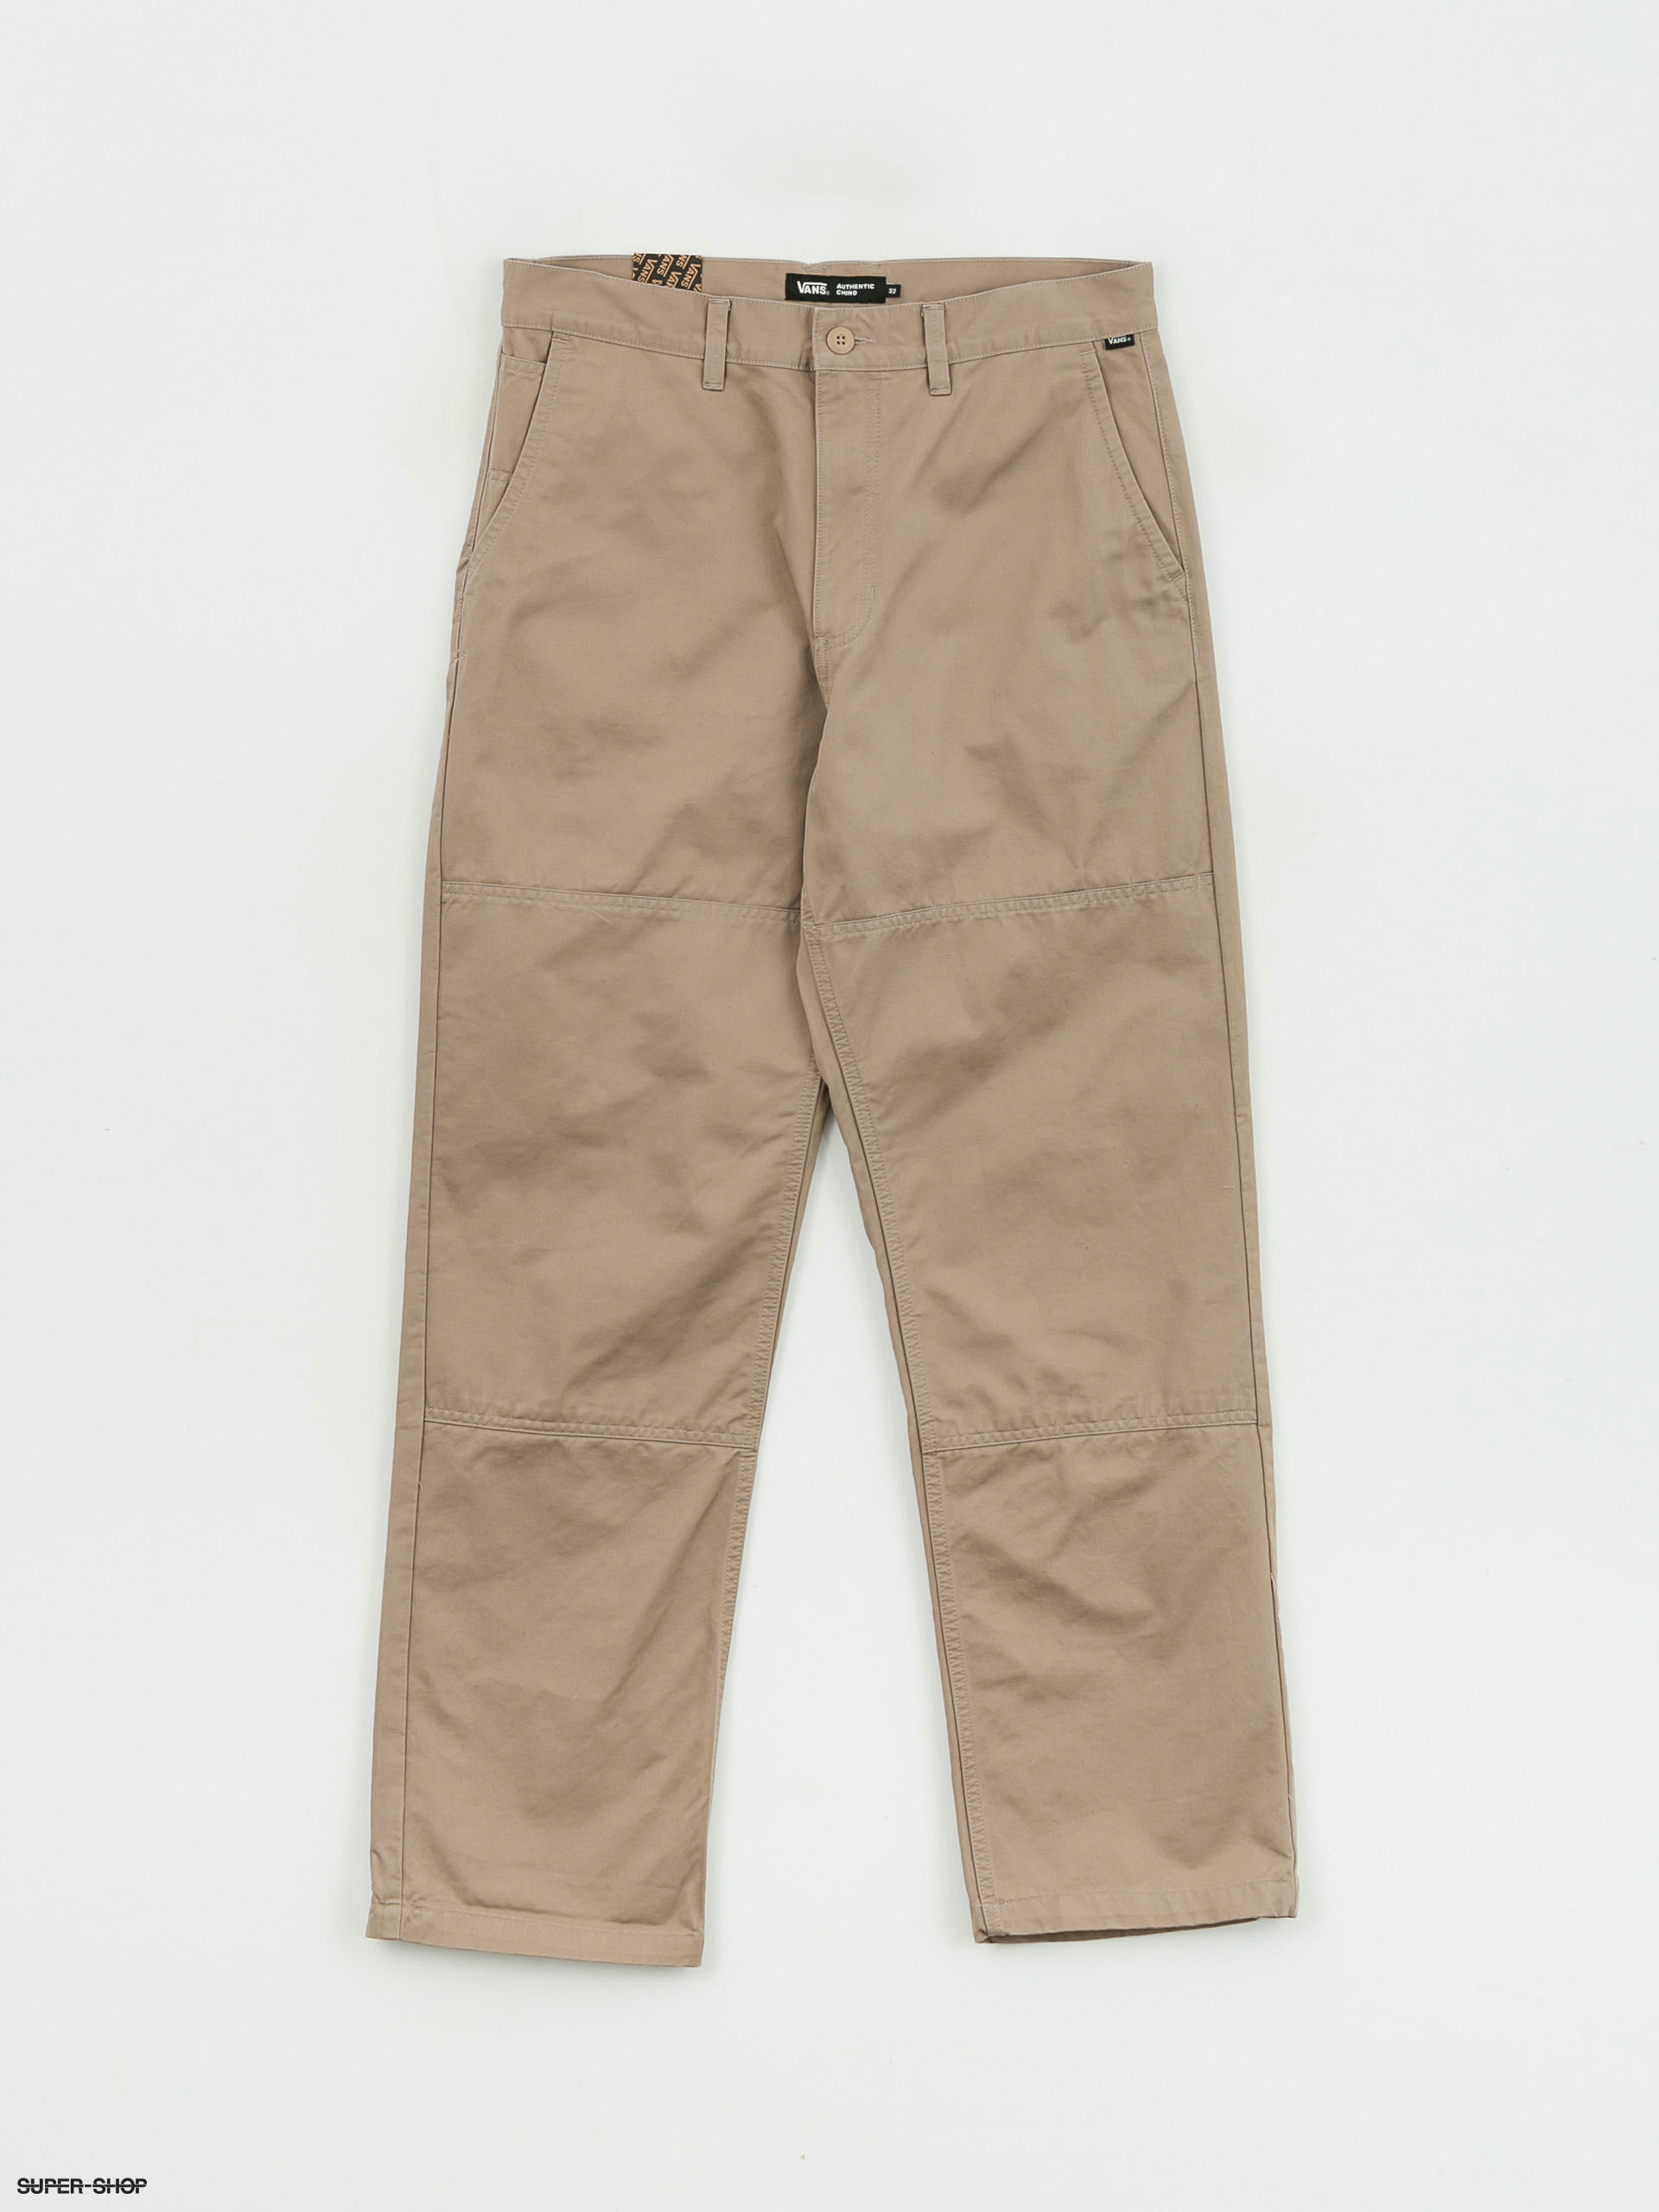 Vans Authentic Chino Loose Pants (desert taupe)